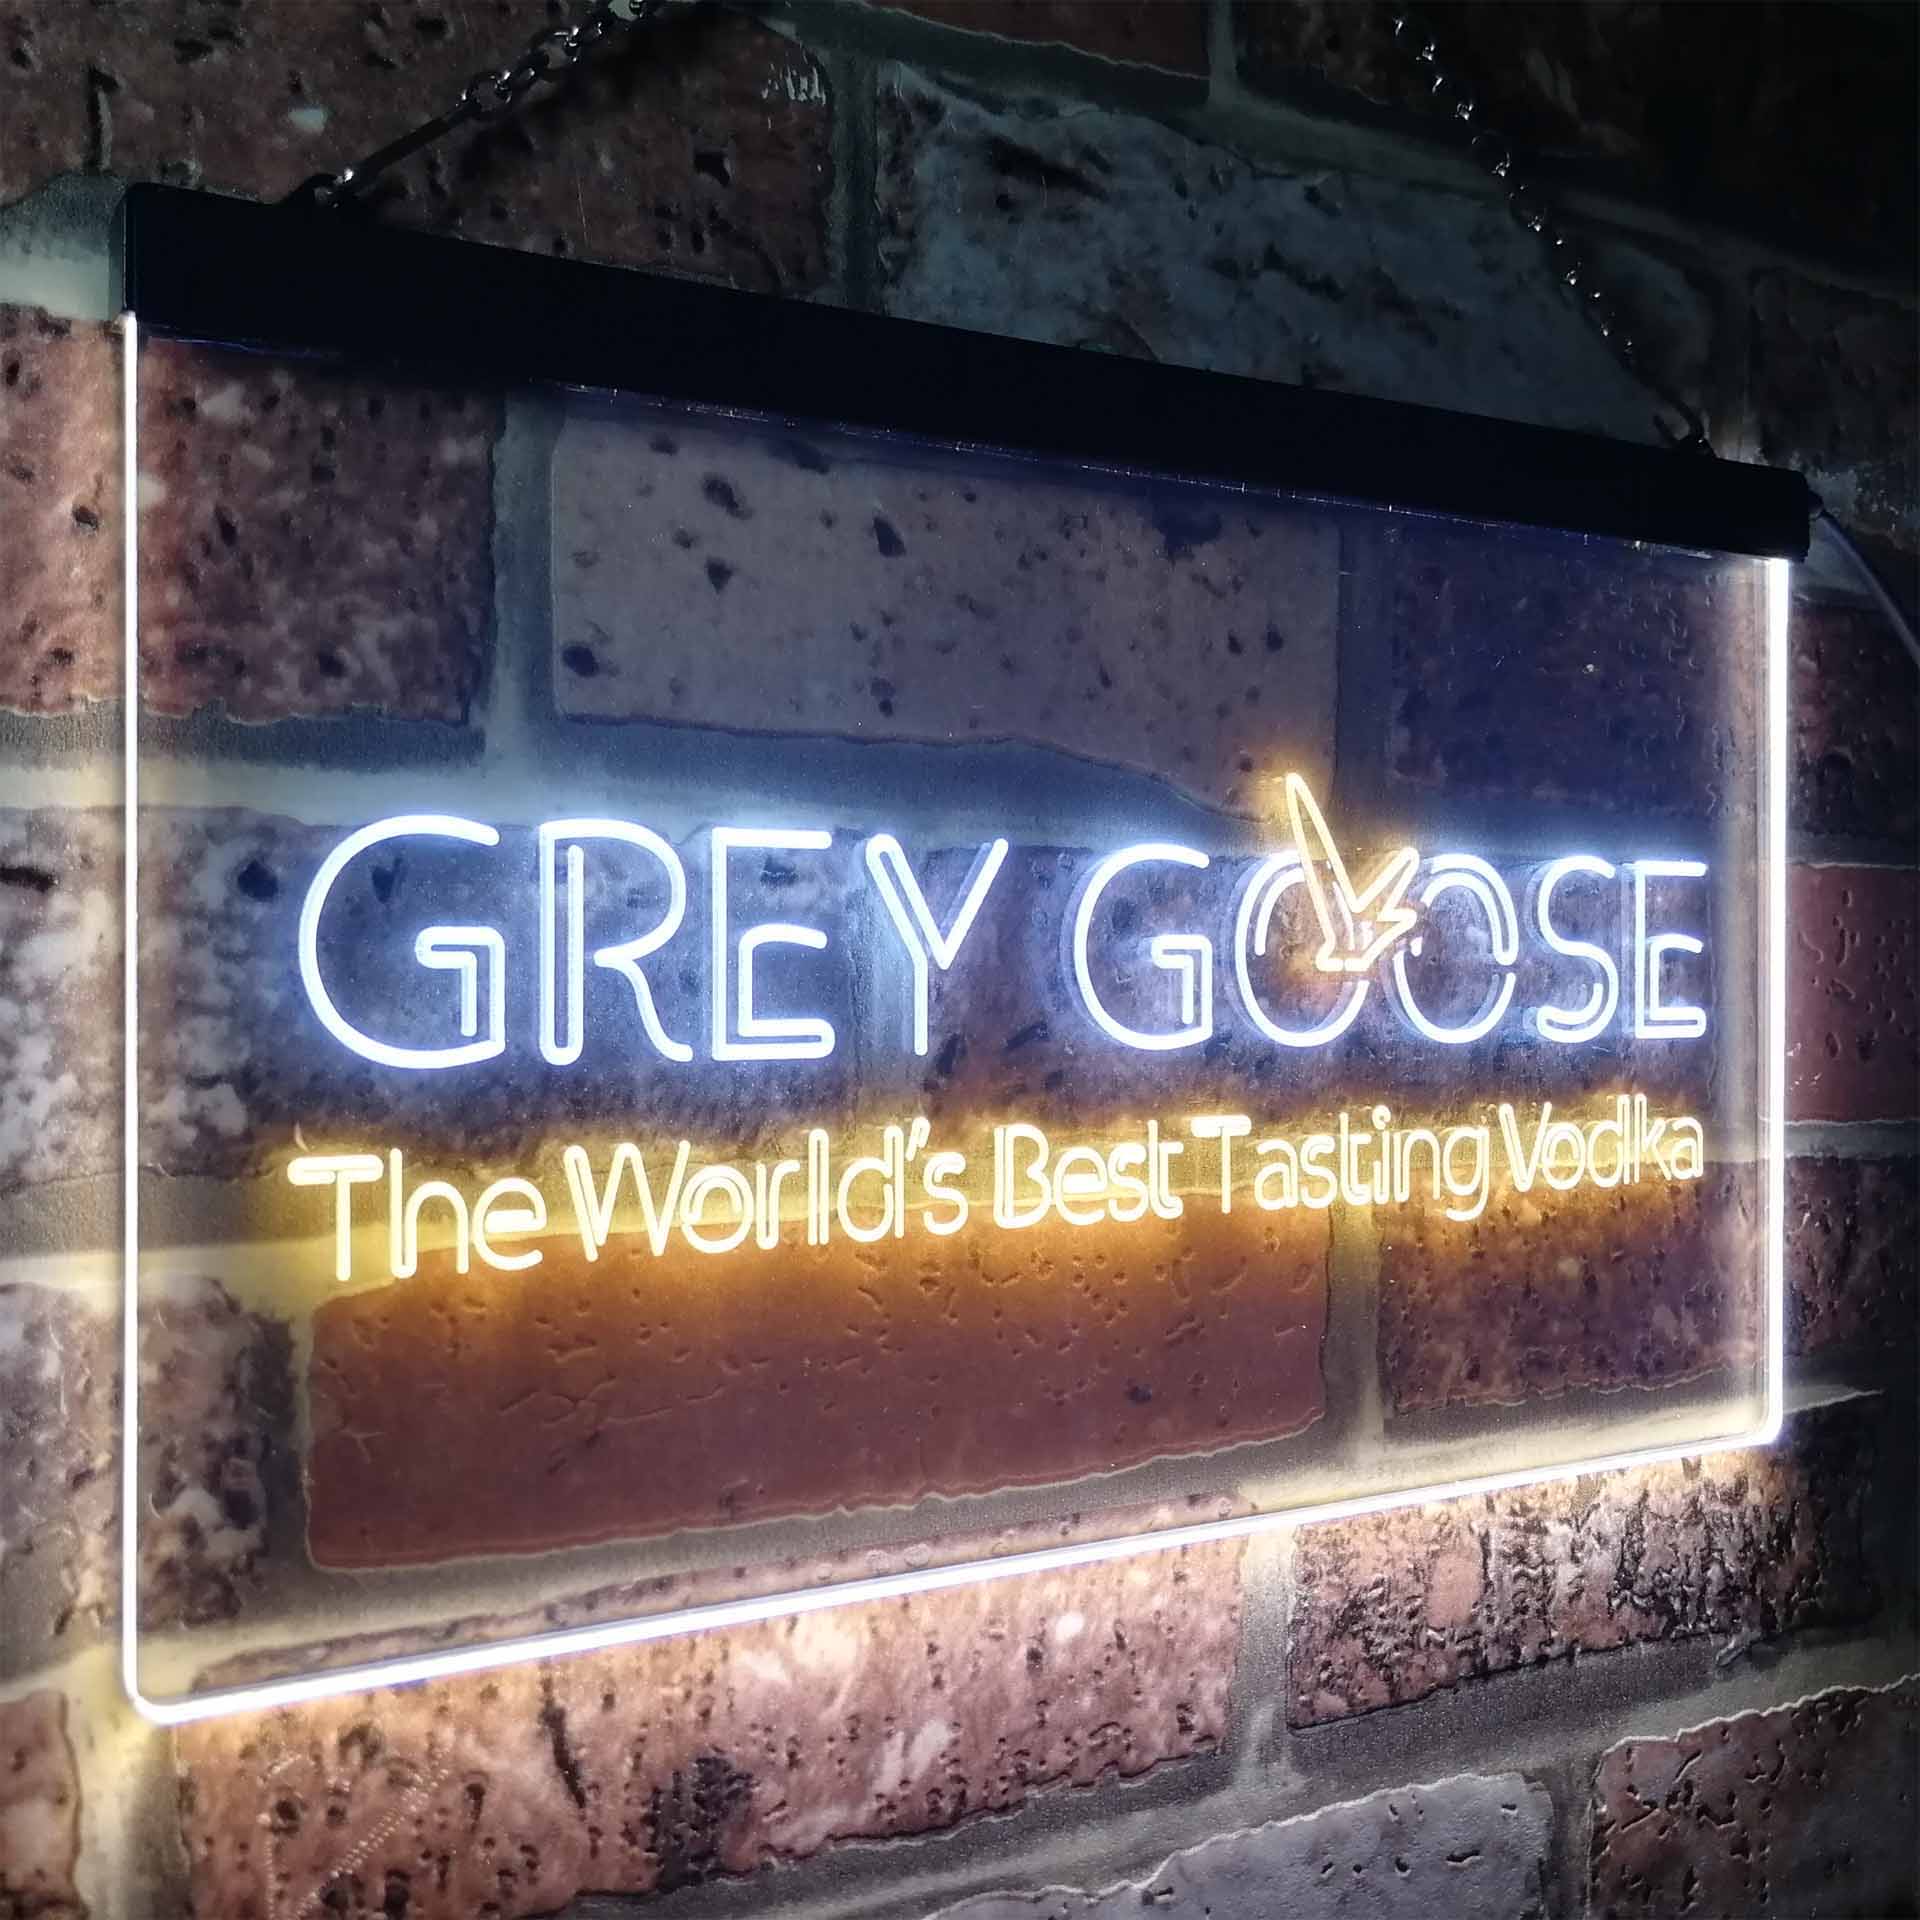 Grey Goose Neon LED Sign